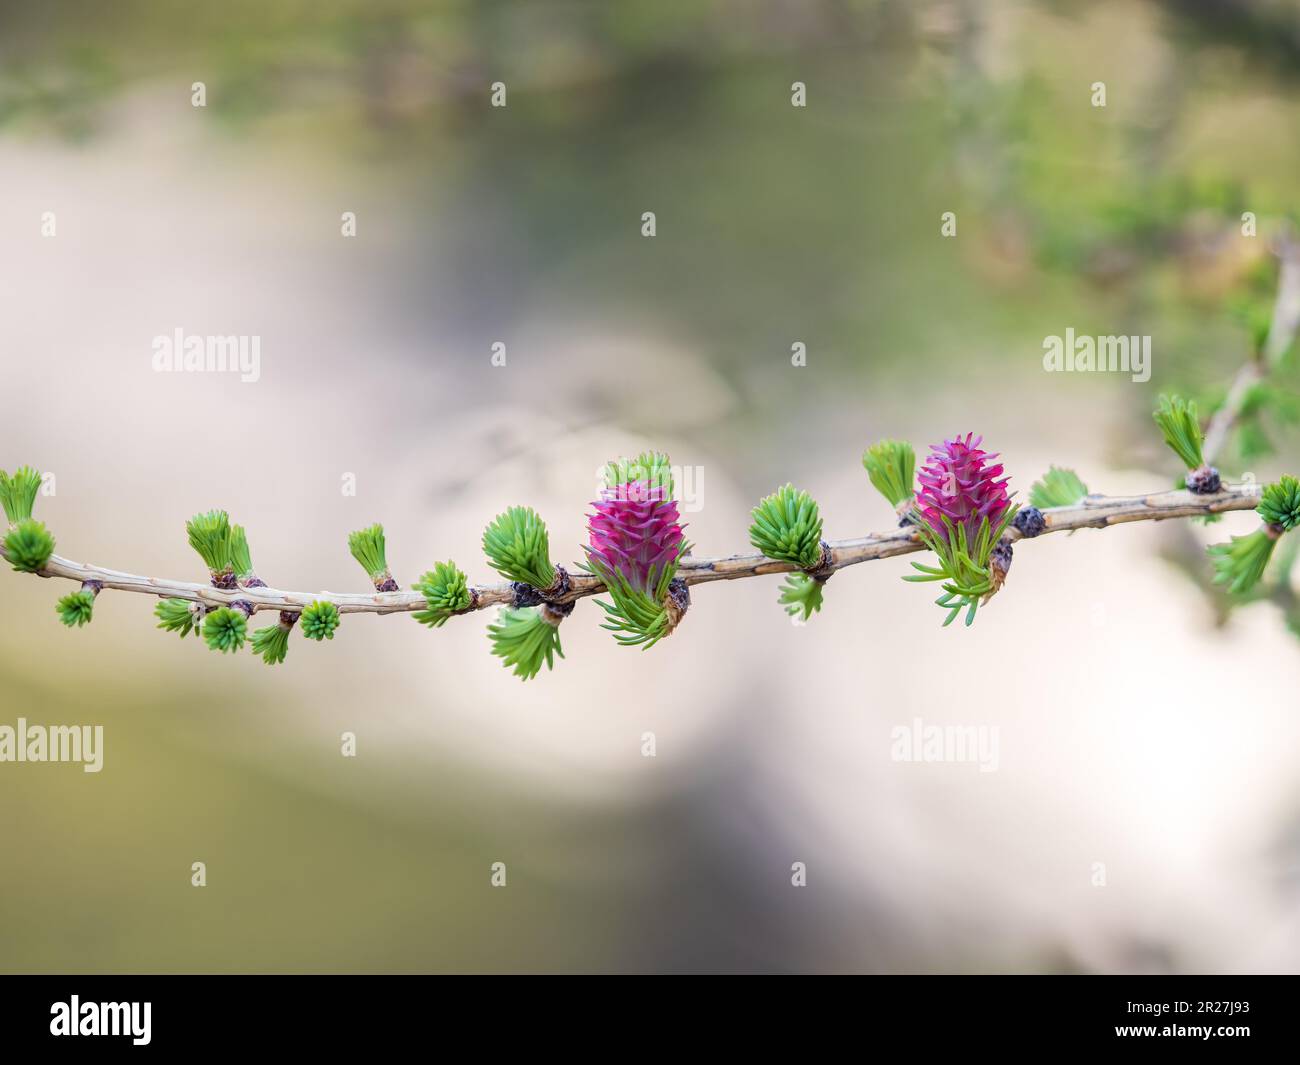 Larch tree fresh pink cones blossom at spring on nature background. Branches with young needles European larch Larix decidua with pink flowers. Stock Photo